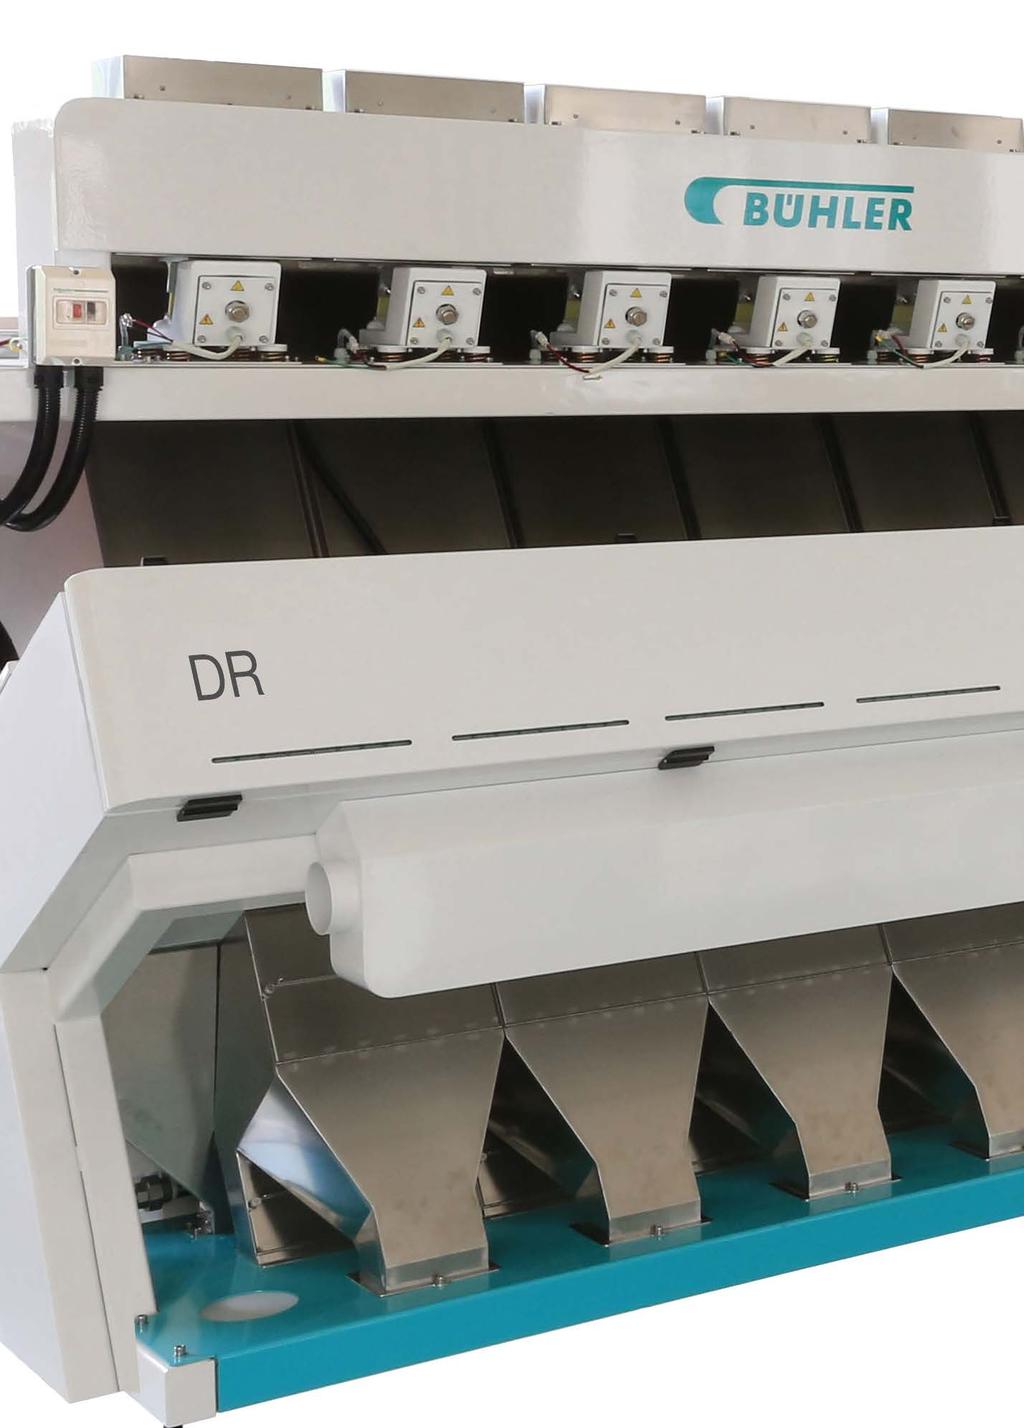 Bühler DR Stable and consistent optical